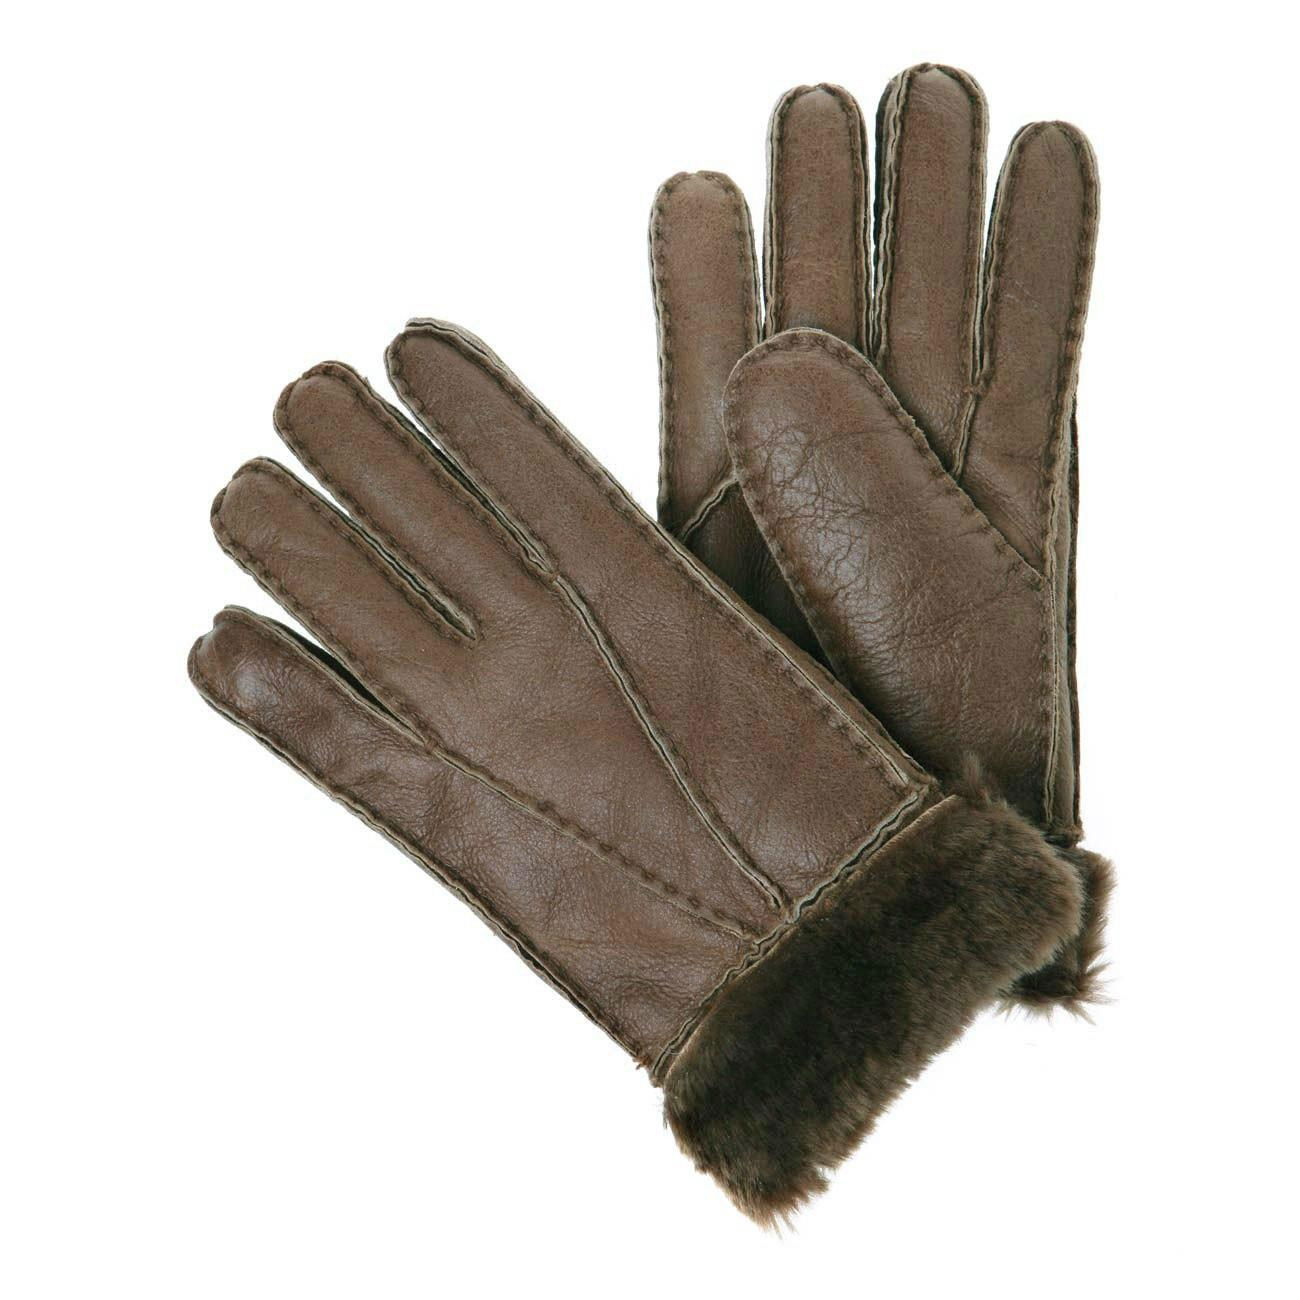 Hot sale leather gloves with high quality 3